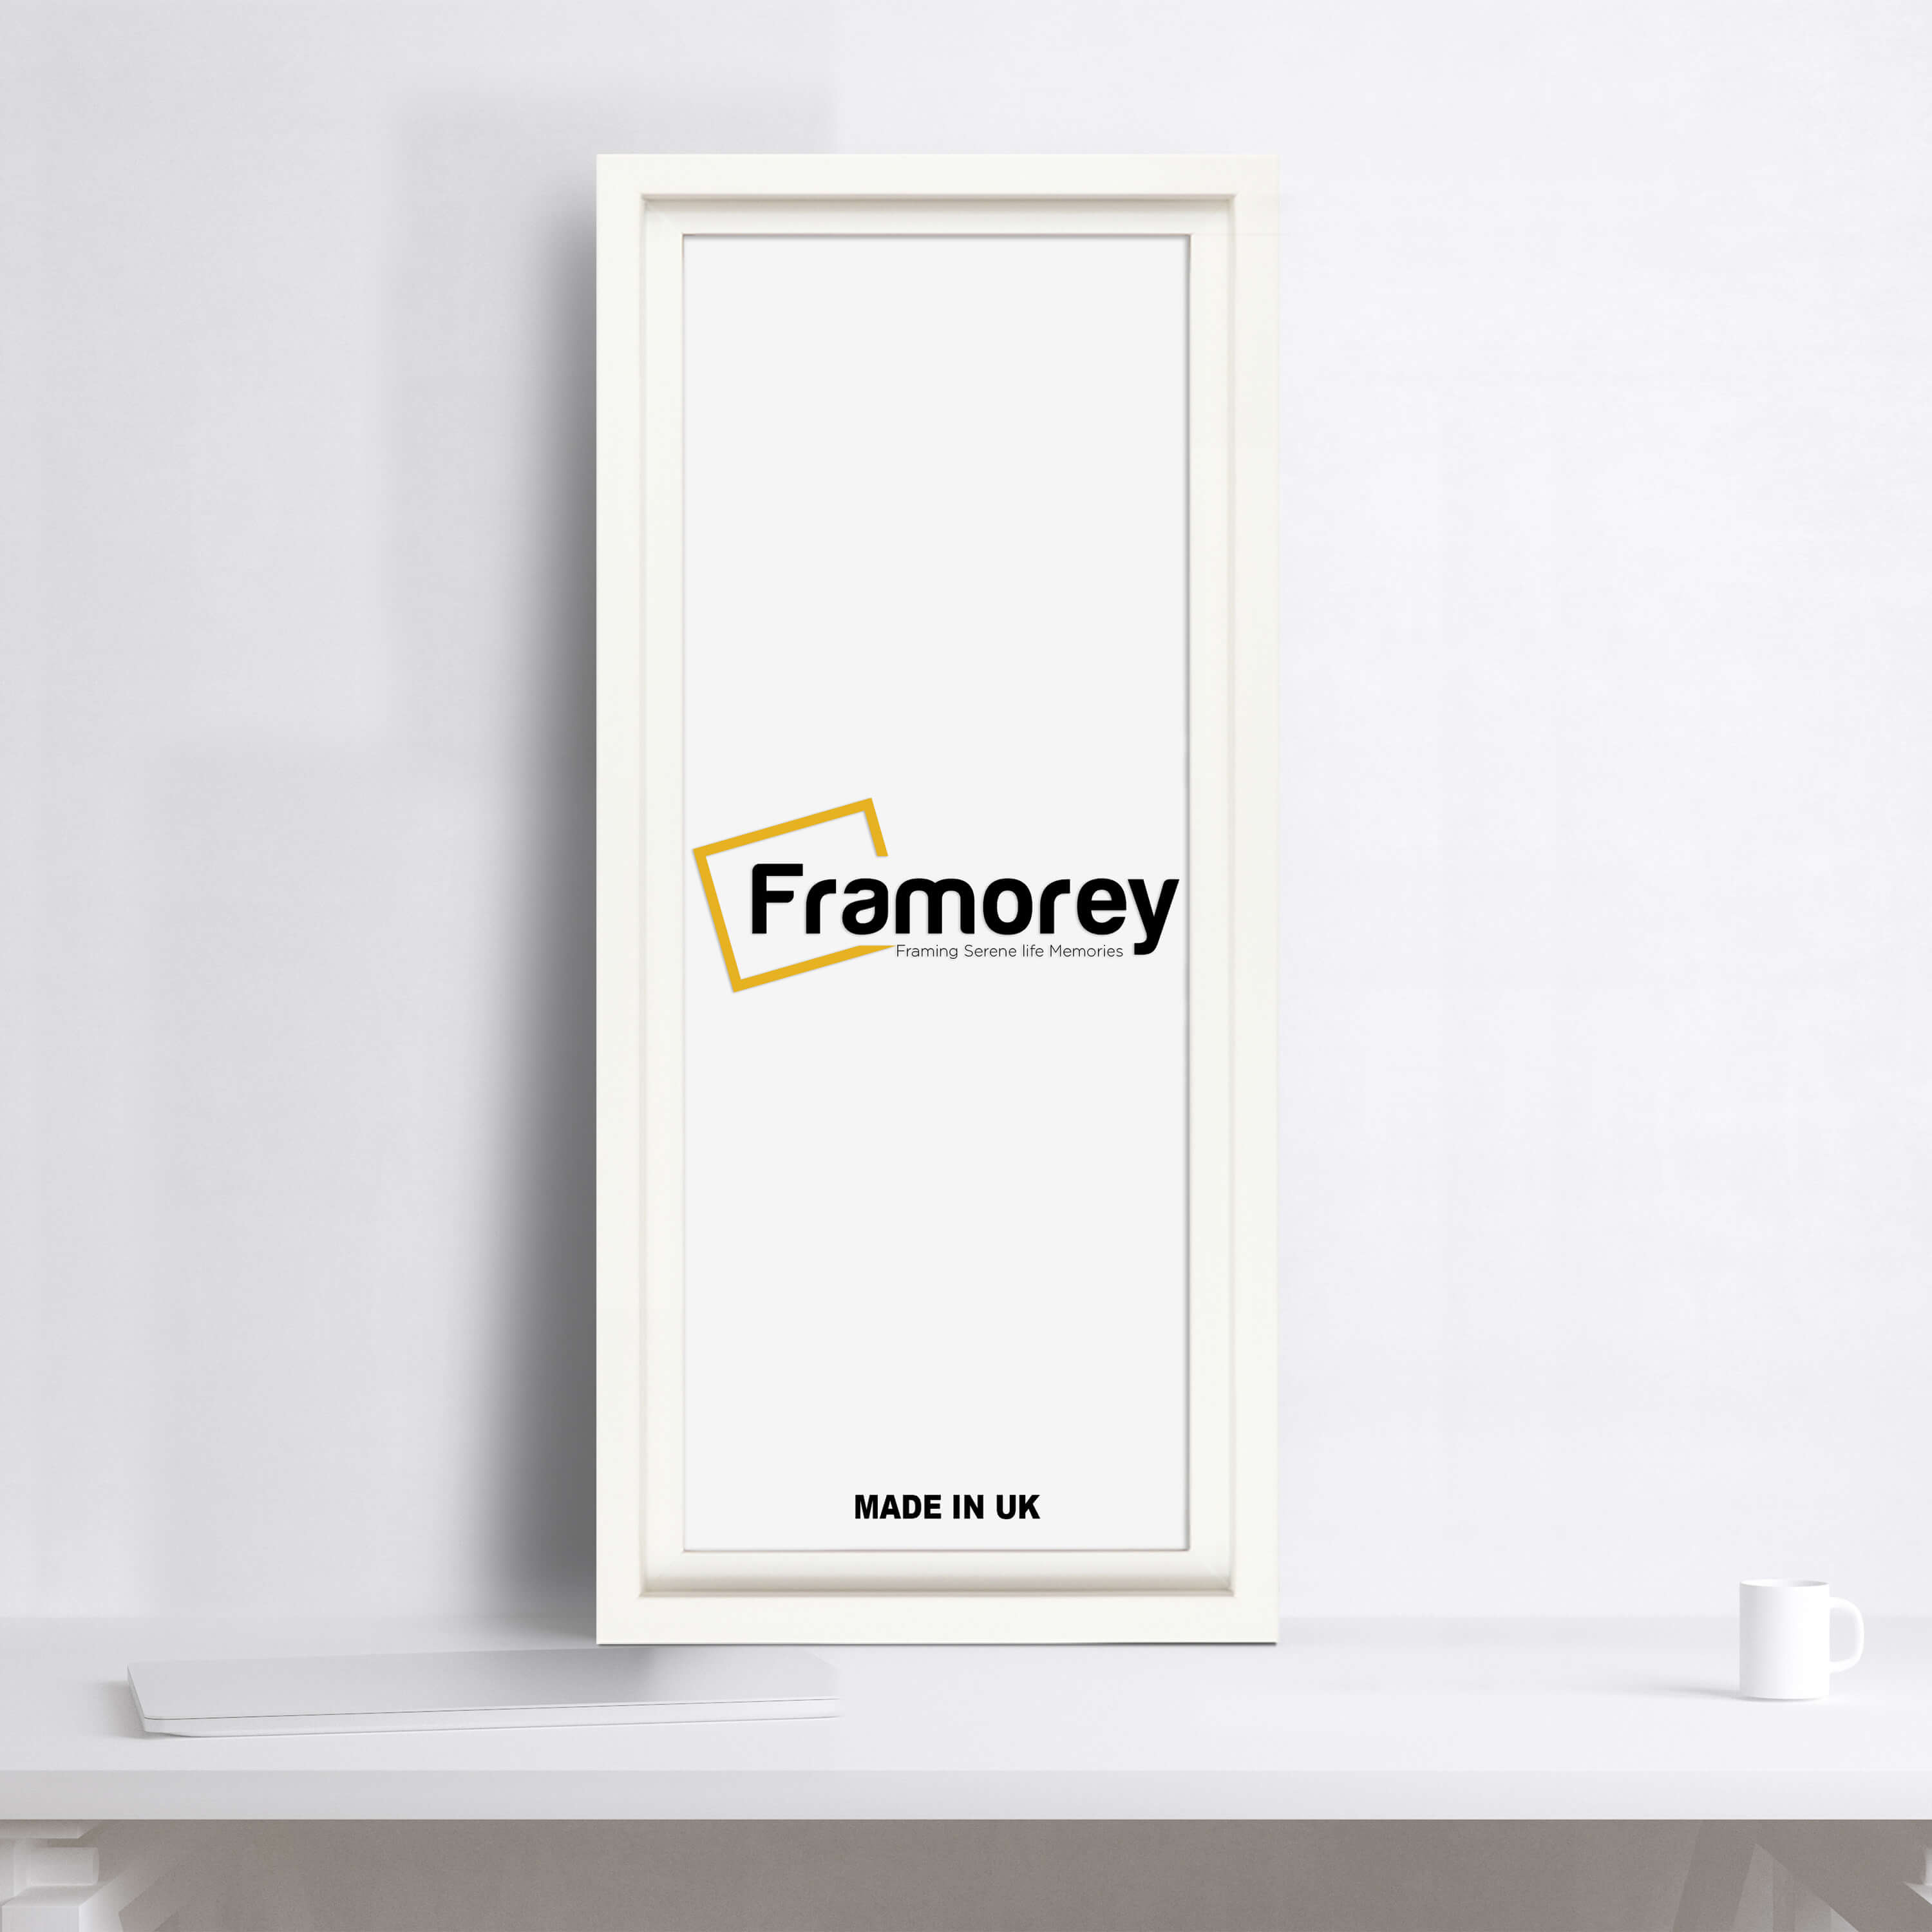 Panorama Style White Oslo Photo Frame Panoramic Picture Frames